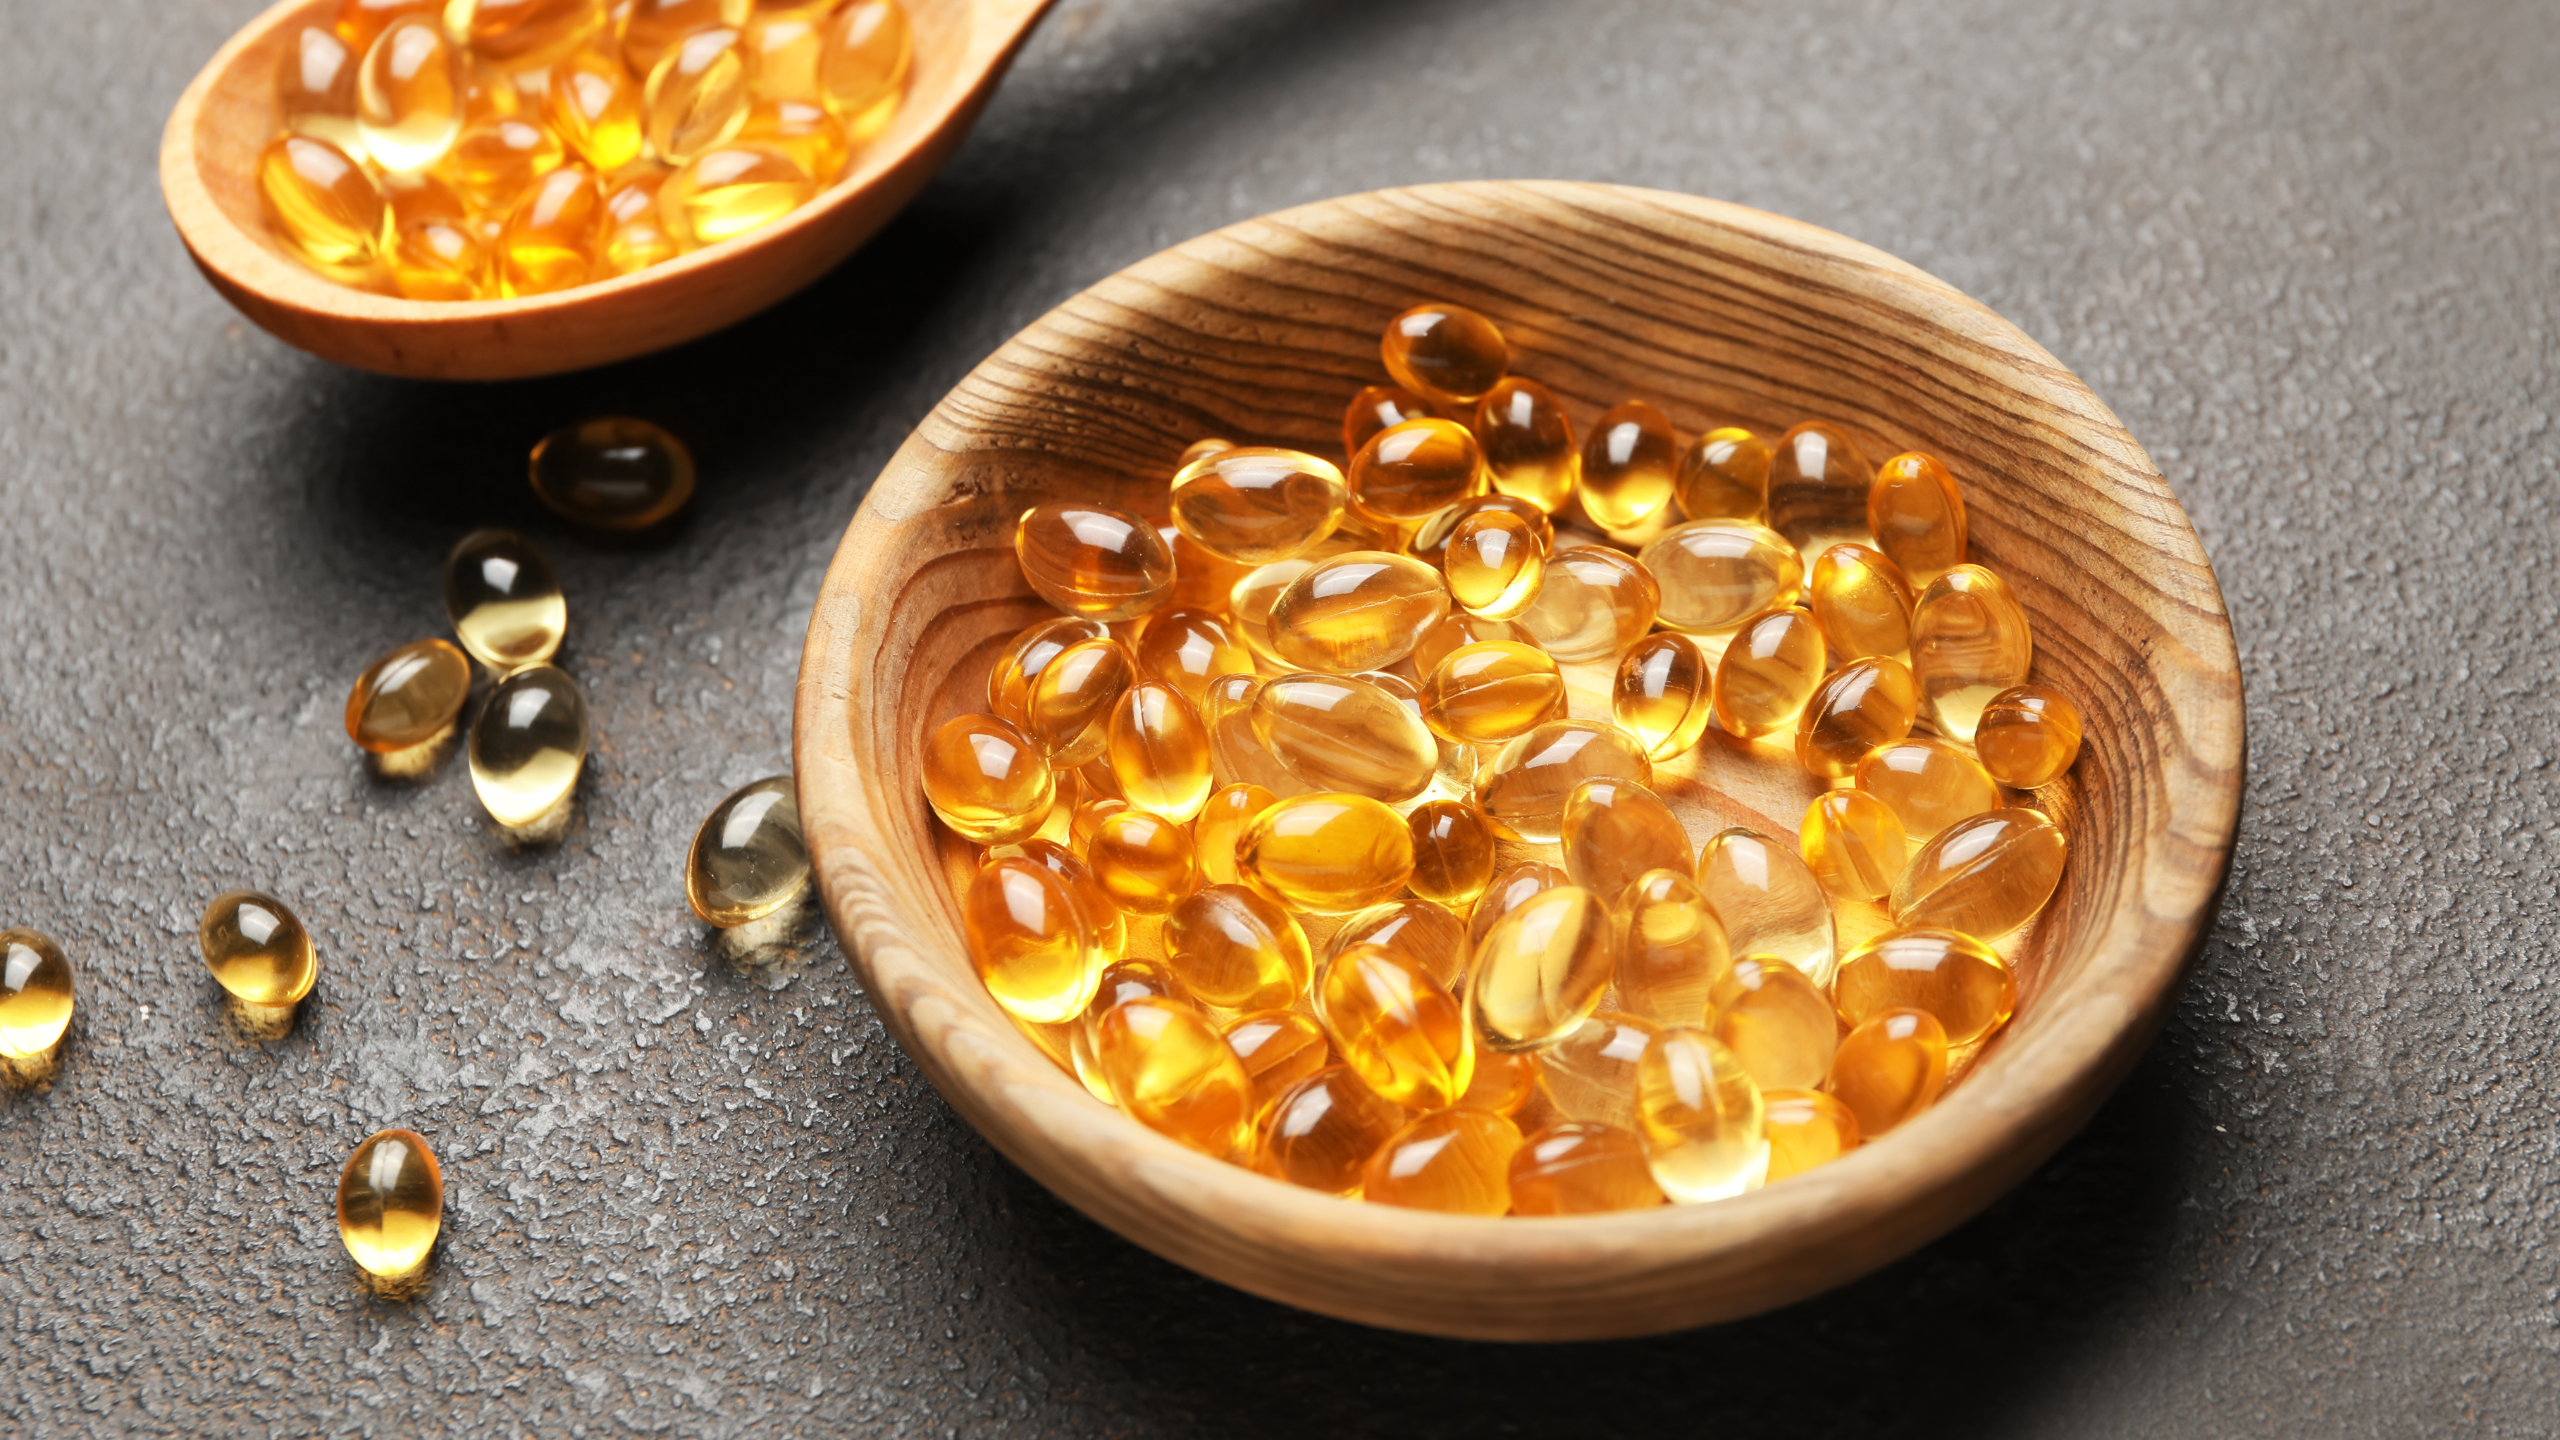 Can Fish Oil Help Reduce Symptoms of ADHD?